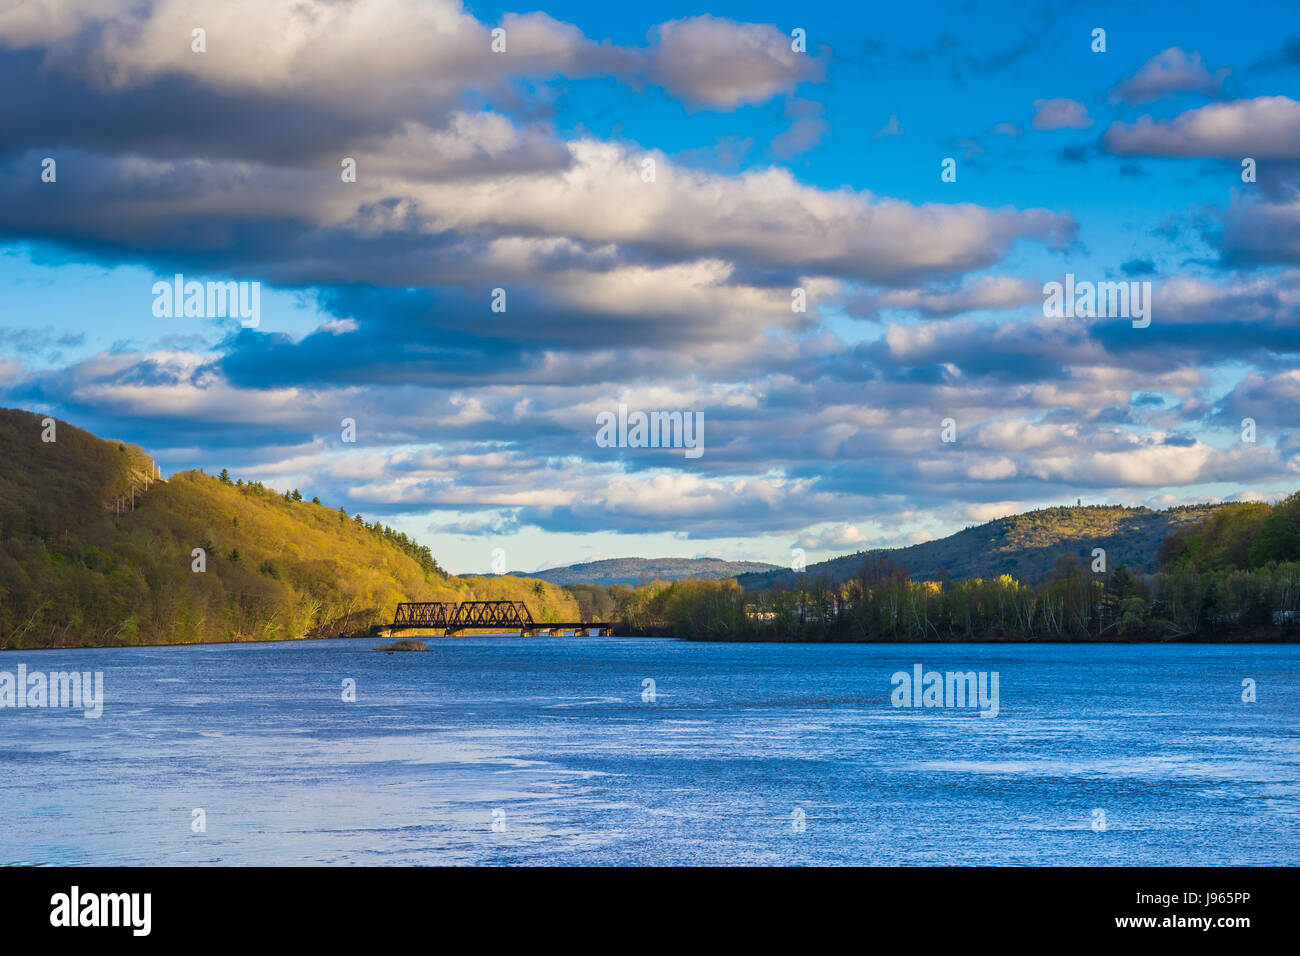 Mountains and railroad bridge over the Connecticut River, in Brattleboro, Vermont. Stock Photo